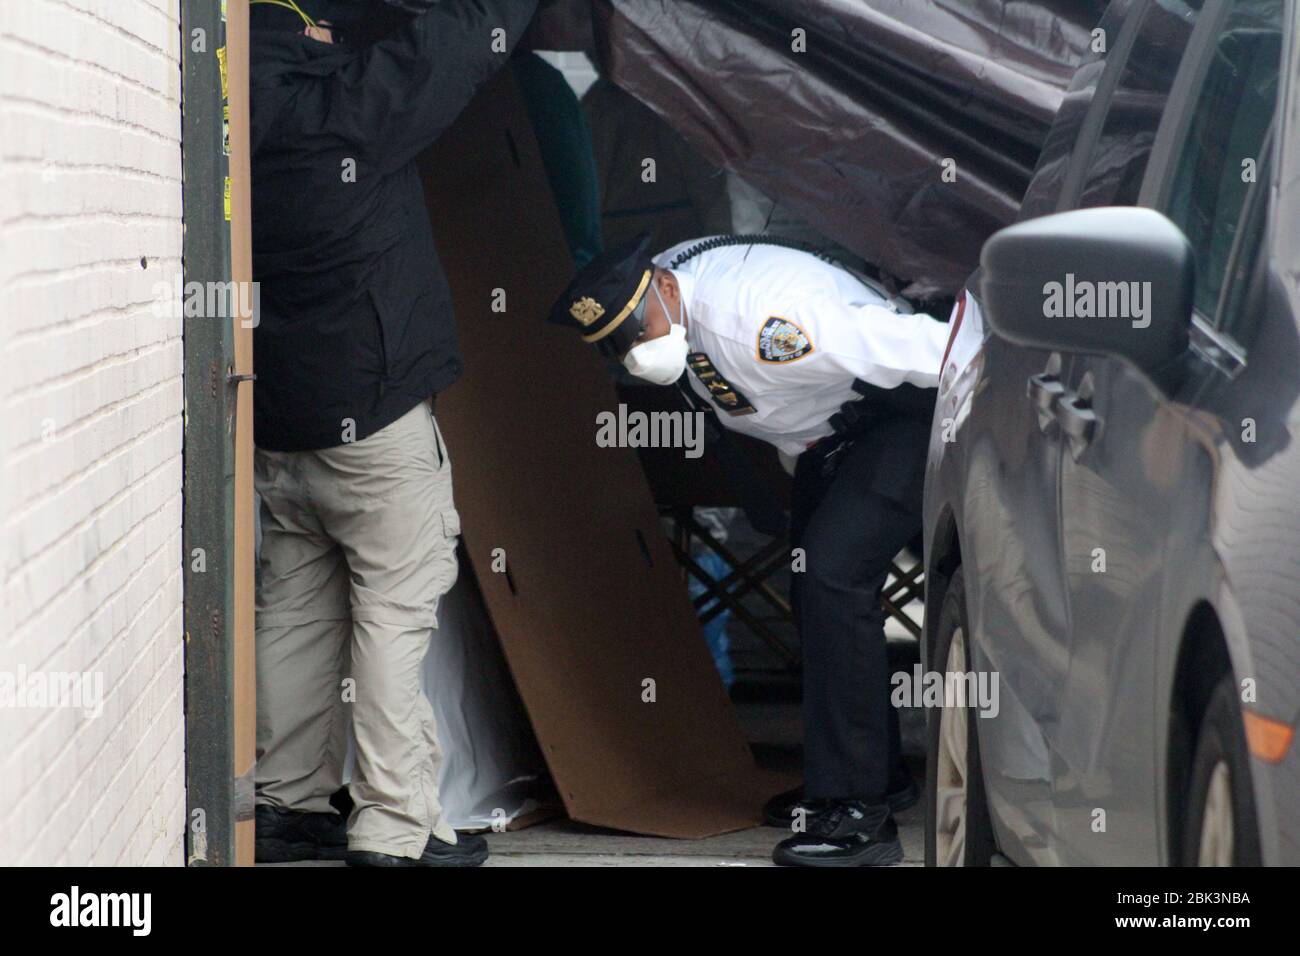 New York, New York, USA. 30th Apr, 2020. A stretcher and cardboard caskets behind him, a NYPD officer passes under the tarpaulin that has been deployed in front of the Andrew T. Cleckley Funeral Home in Brooklyn where bodies non properly cared are removed. 60 bodies were stored in 4 non-refregerated vehiciles lining the street nearby stores. Neighbors reported a foul smell still persistent and fluids dripping from the trucks The funeral home was overwhelmed by COVID-19 deaths in New York. Credit: Marie Le Ble/ZUMA Wire/Alamy Live News Stock Photo